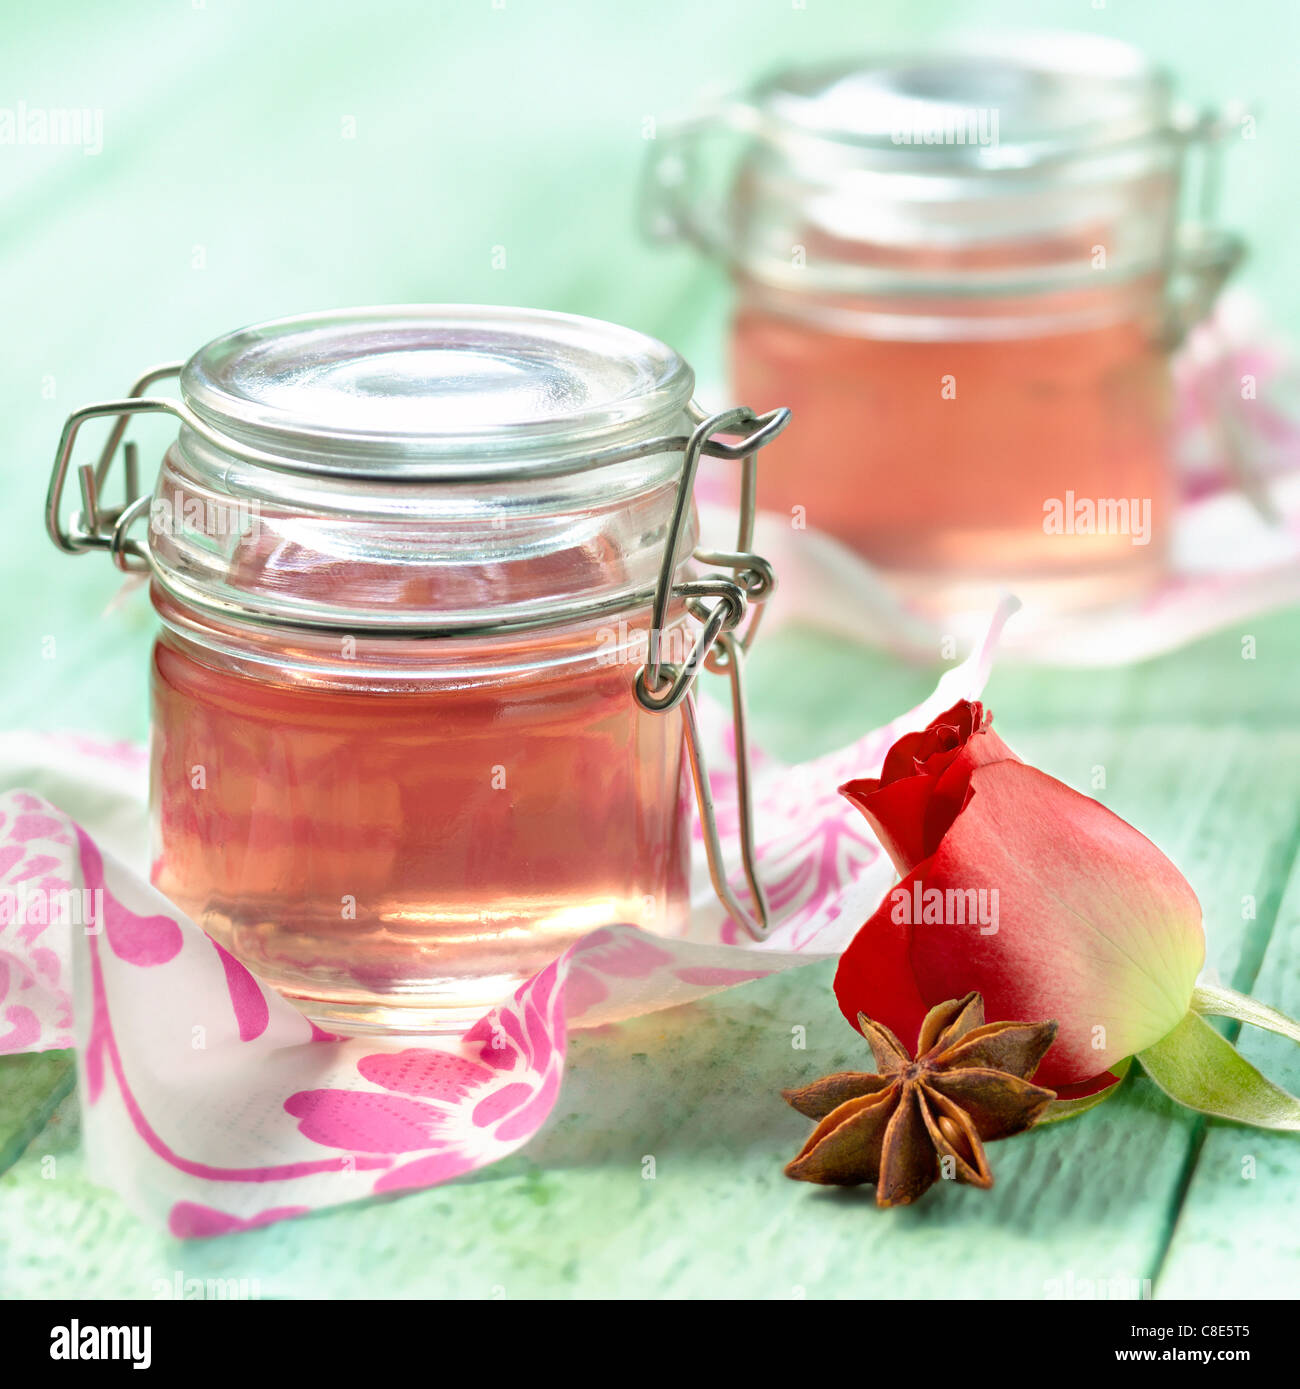 Rose and star anise-flavored jelly Stock Photo